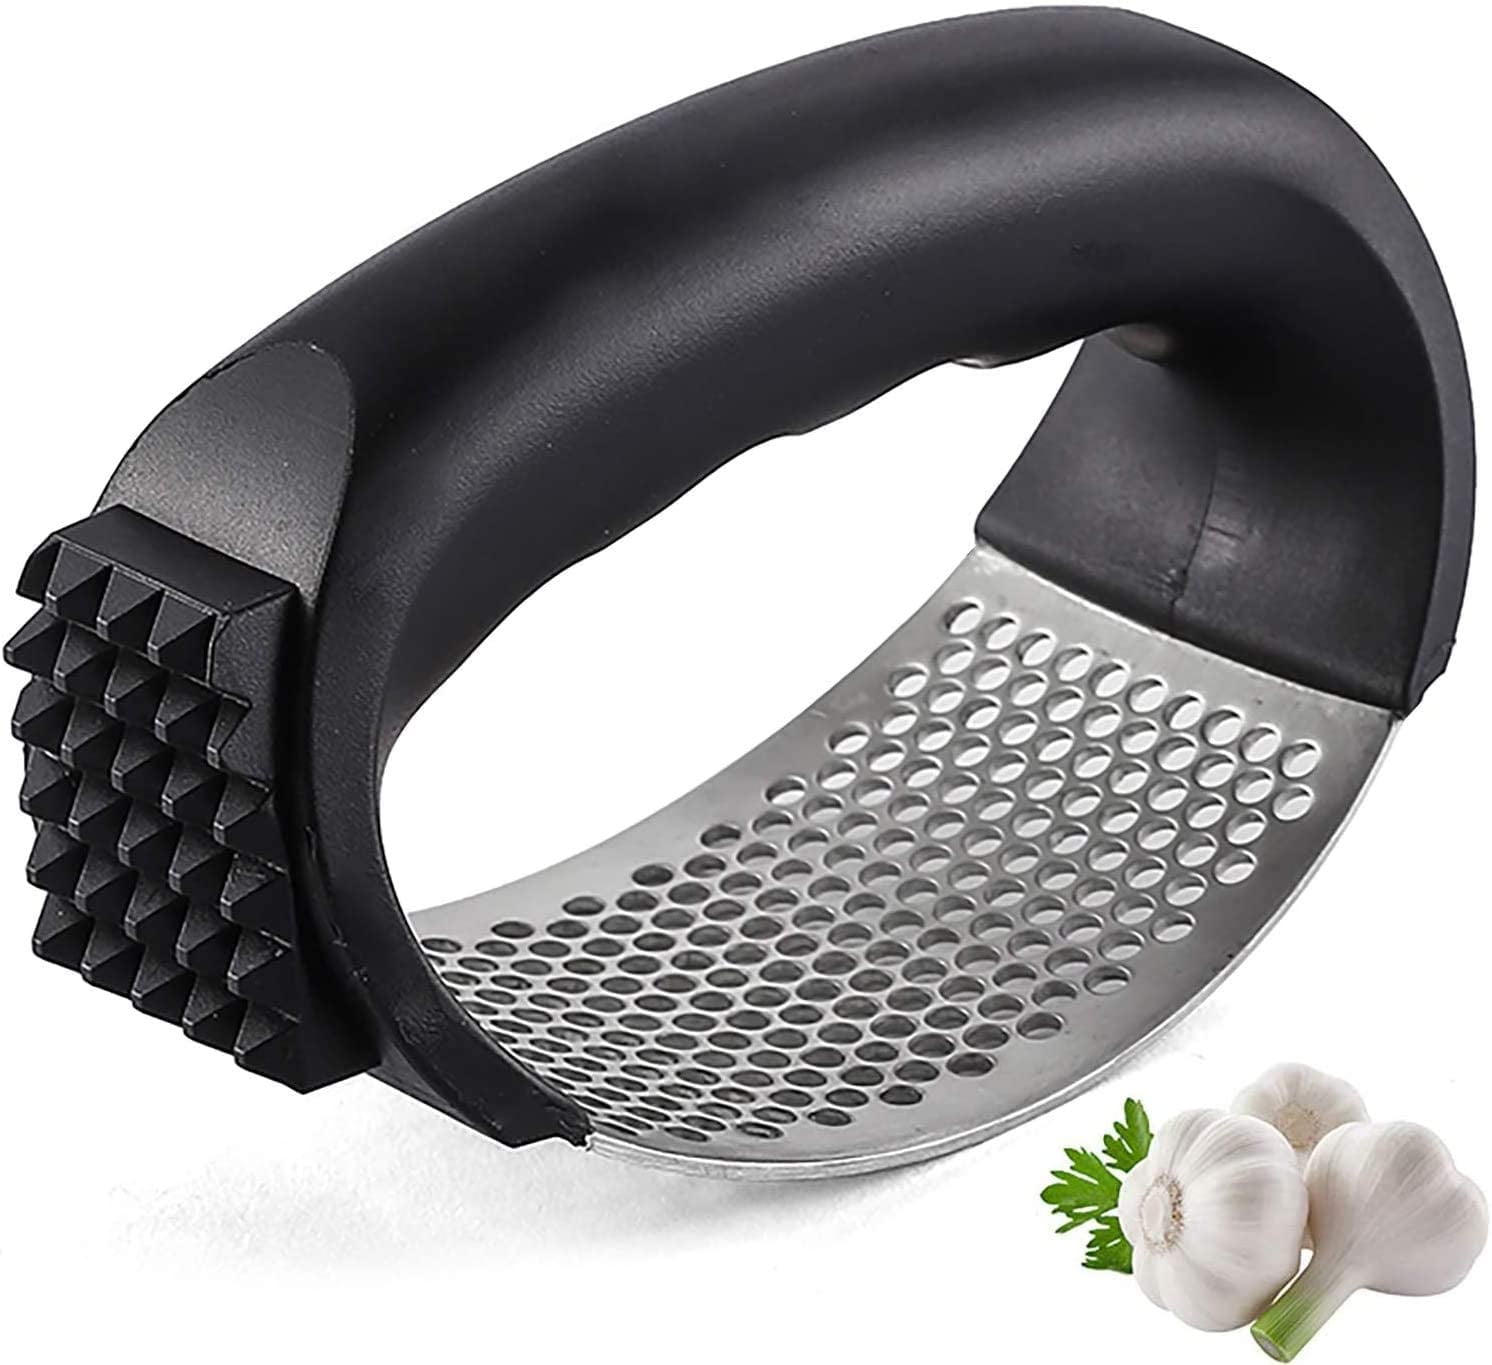 1 X Stainless Steel Garlic Cutter Multifunctional For Onion Chopper Crushes New 